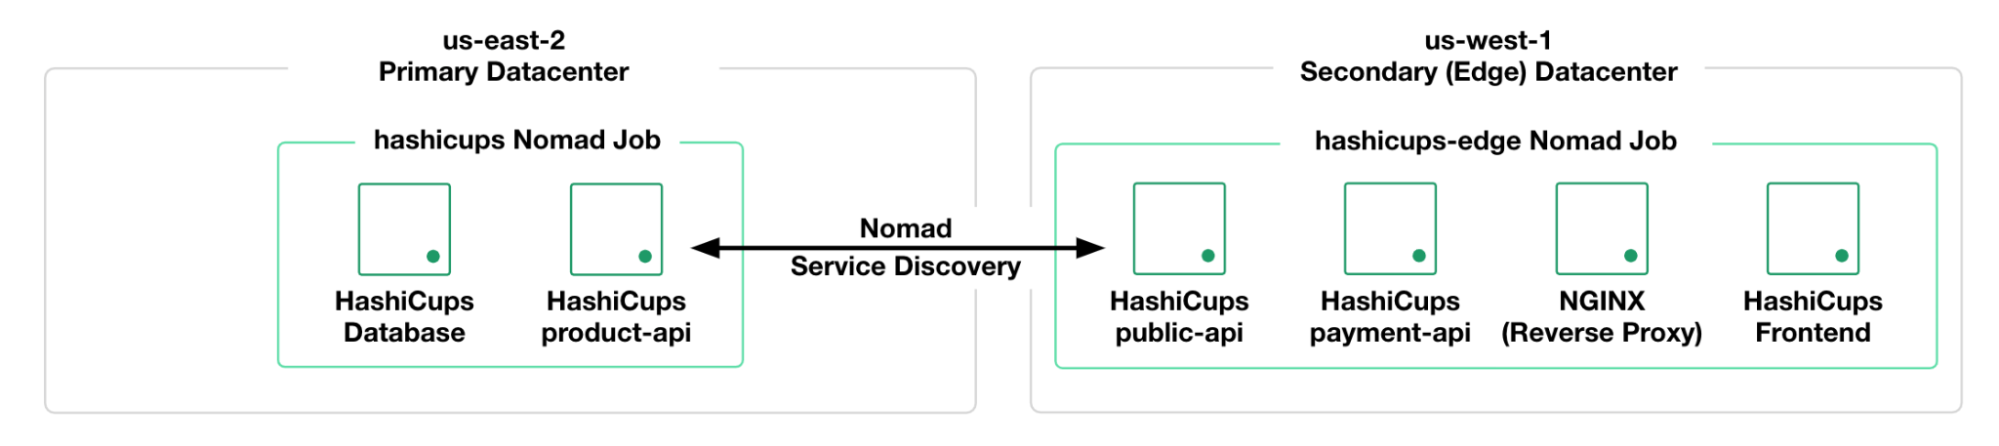 HashiCups services deployed in primary and edge data
centers.